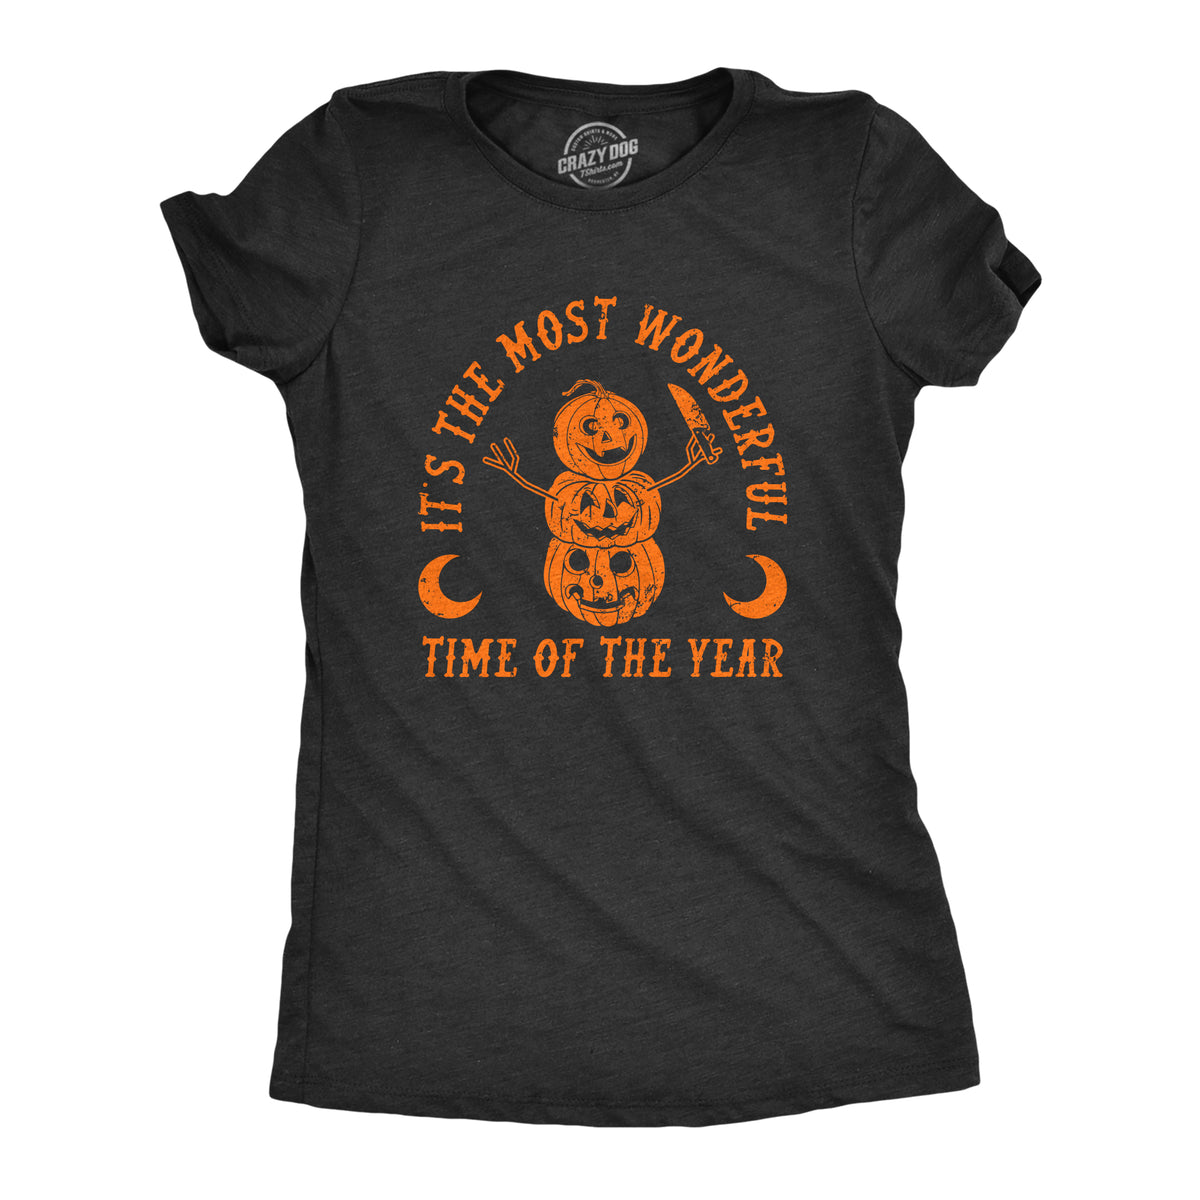 Funny Heather Black - YEAR Its The Most Wonderful Time Of The Year Womens T Shirt Nerdy Halloween Tee